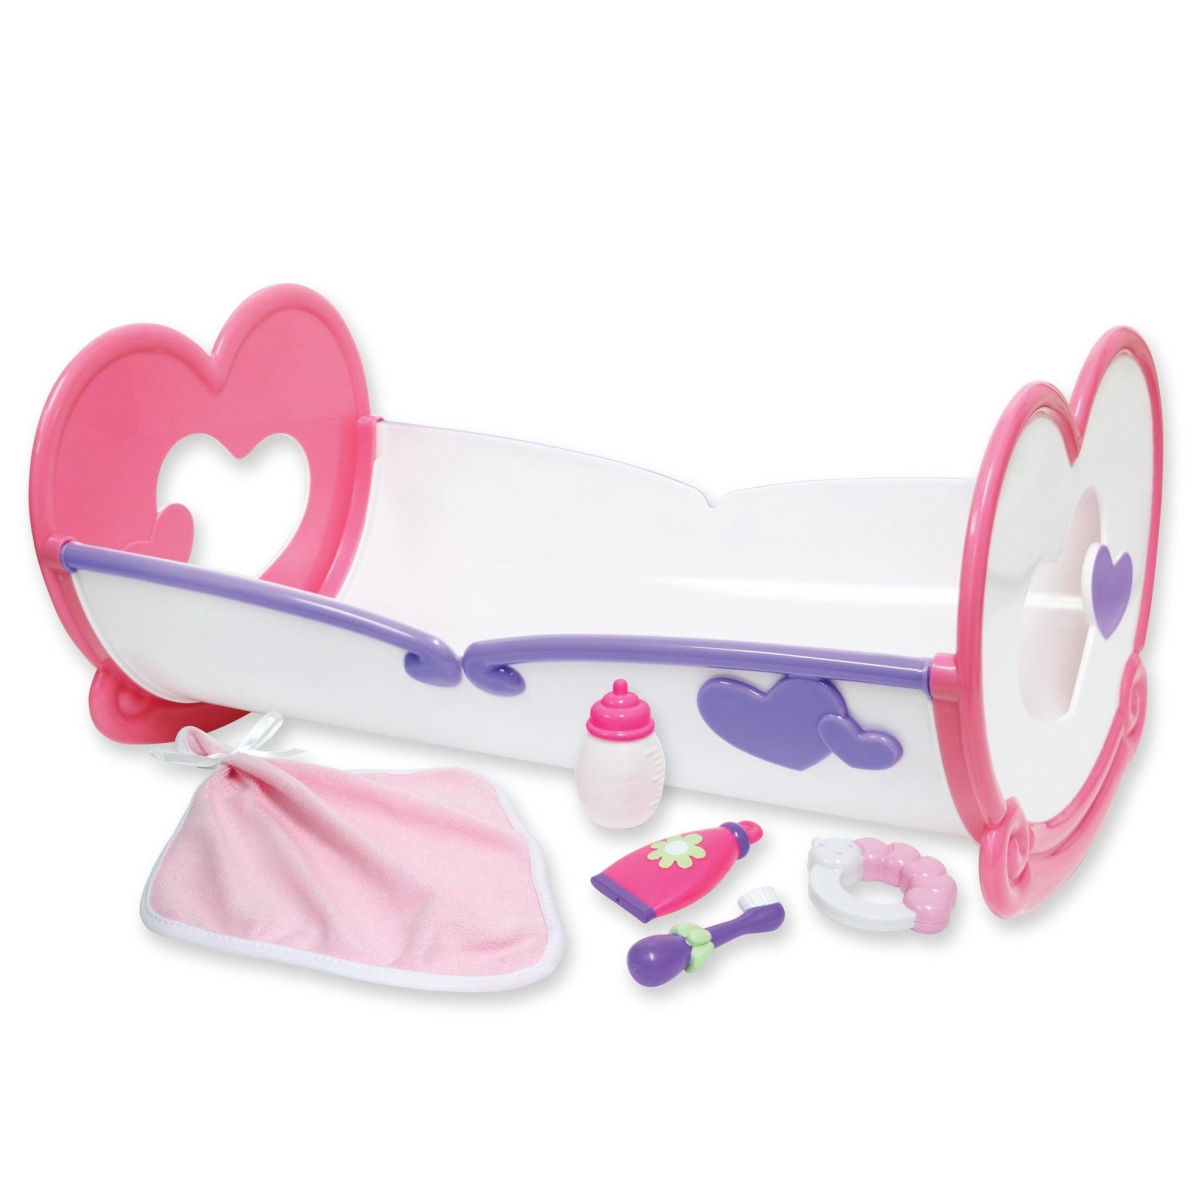 Picture of Deluxe Rocking Doll Crib &amp; Accessories for Dolls Up to 16 in.